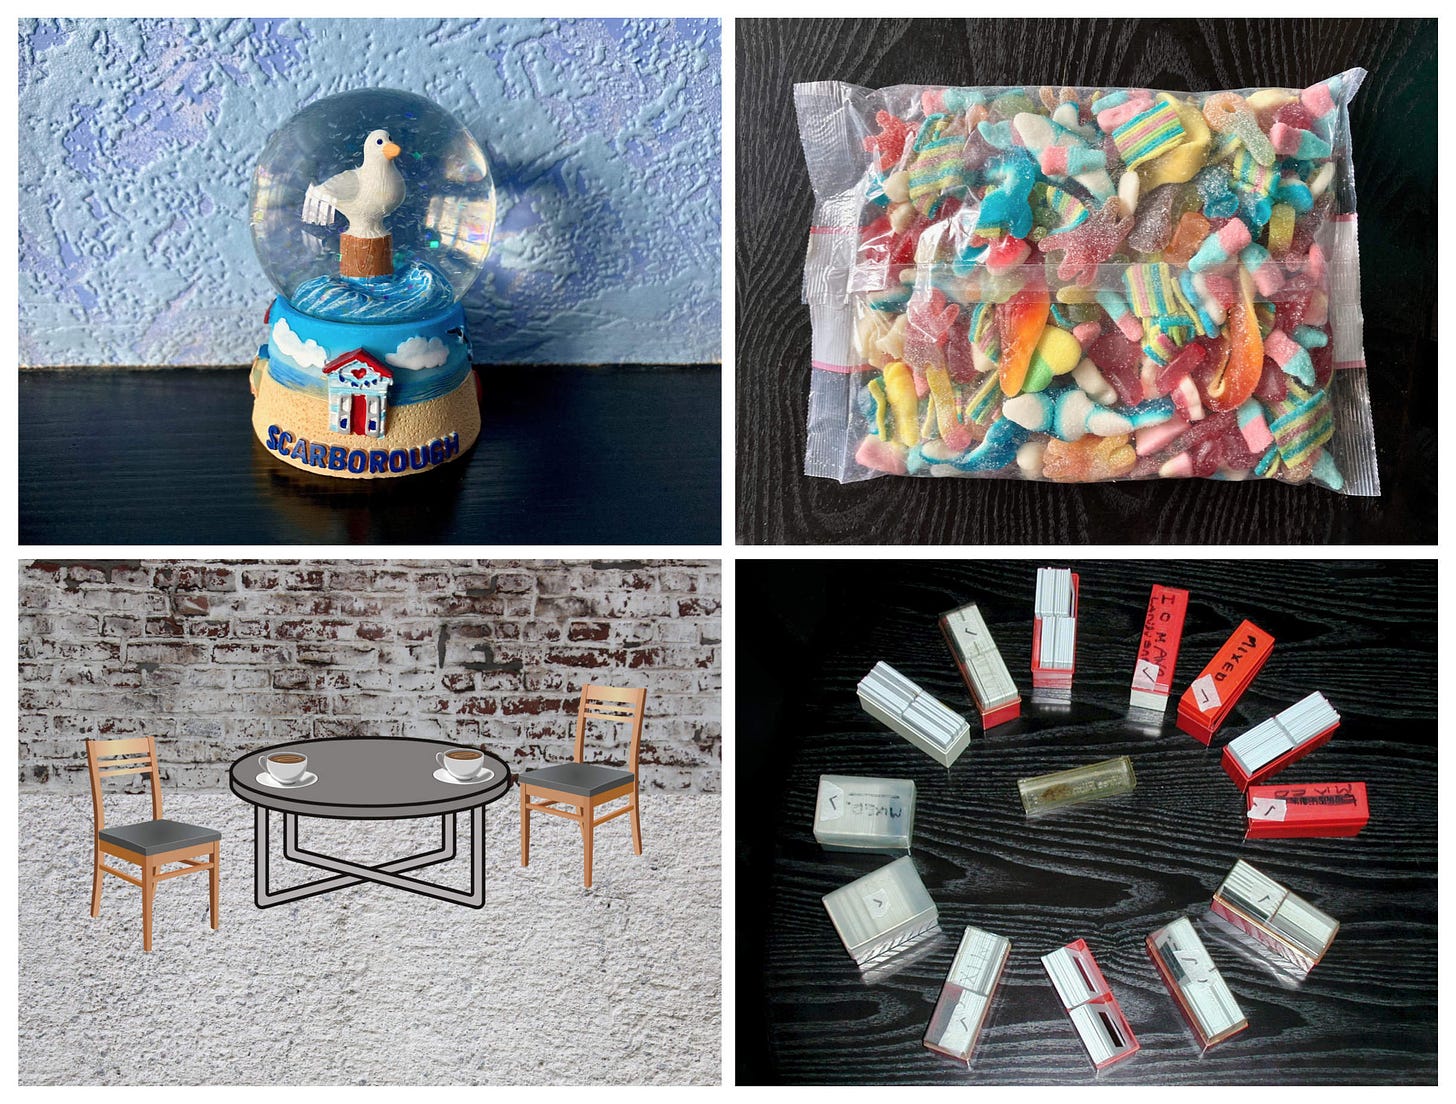 A collage of four images: A seagull snow globe, a bag of sweets, a clipart image of a table with two coffee cups and chairs, and some old 35mm photo slide boxes